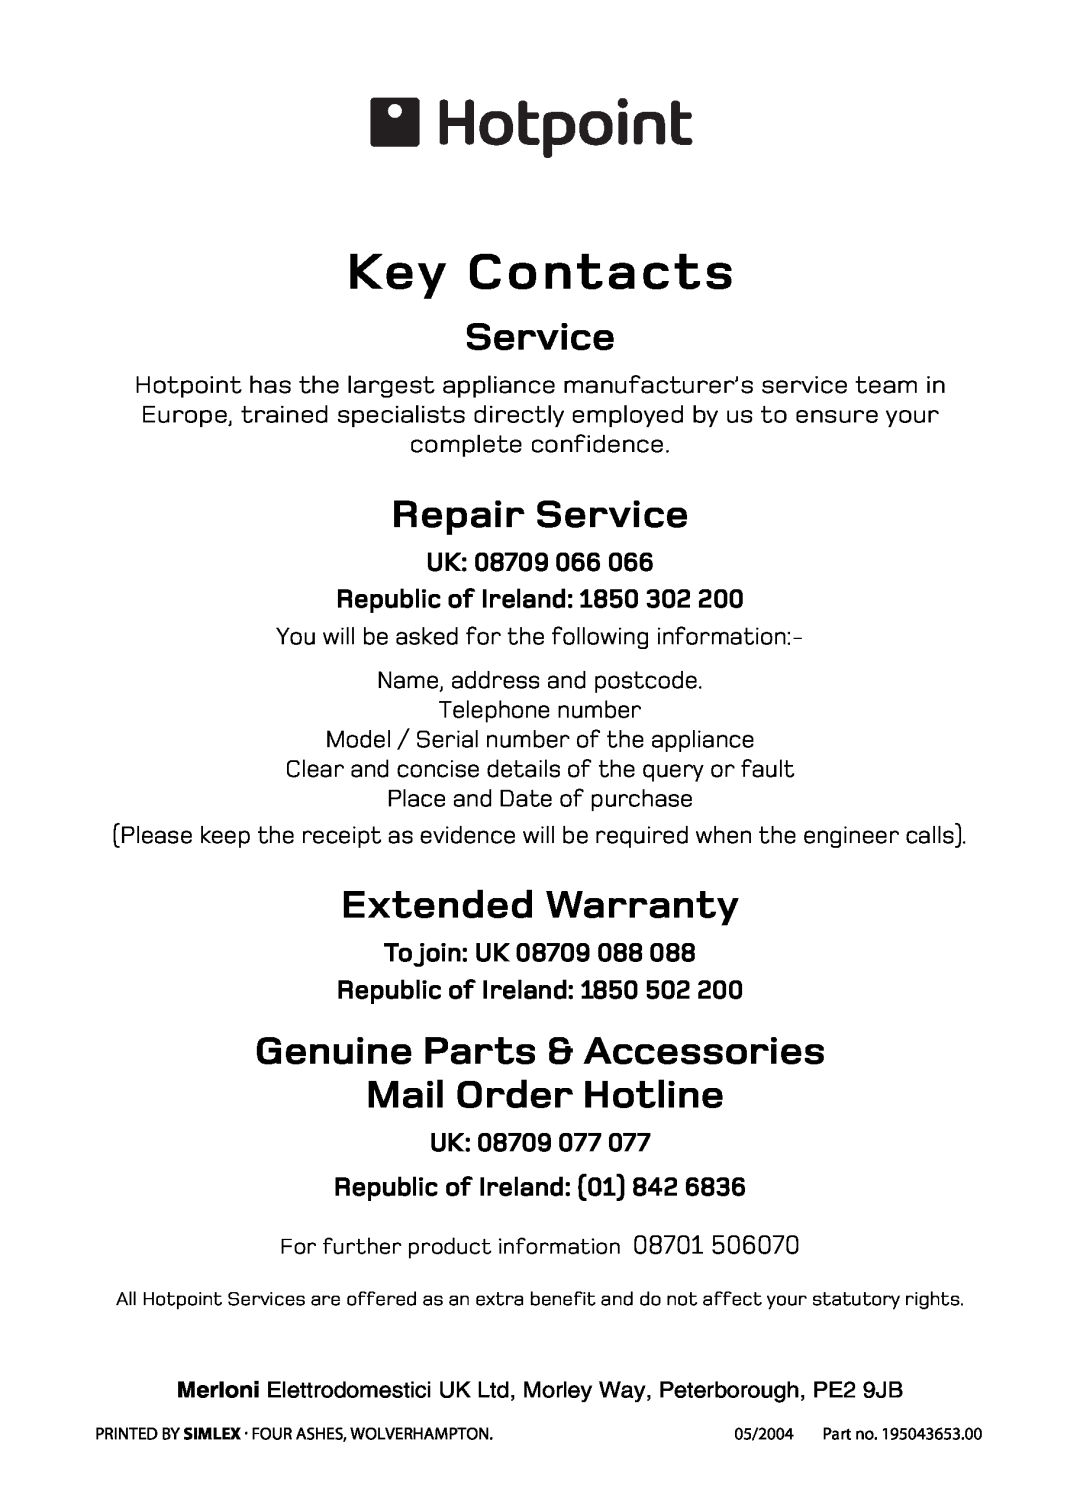 Hotpoint EW86, EW83, EW73 Repair Service, Extended Warranty, Genuine Parts & Accessories Mail Order Hotline, To join UK 